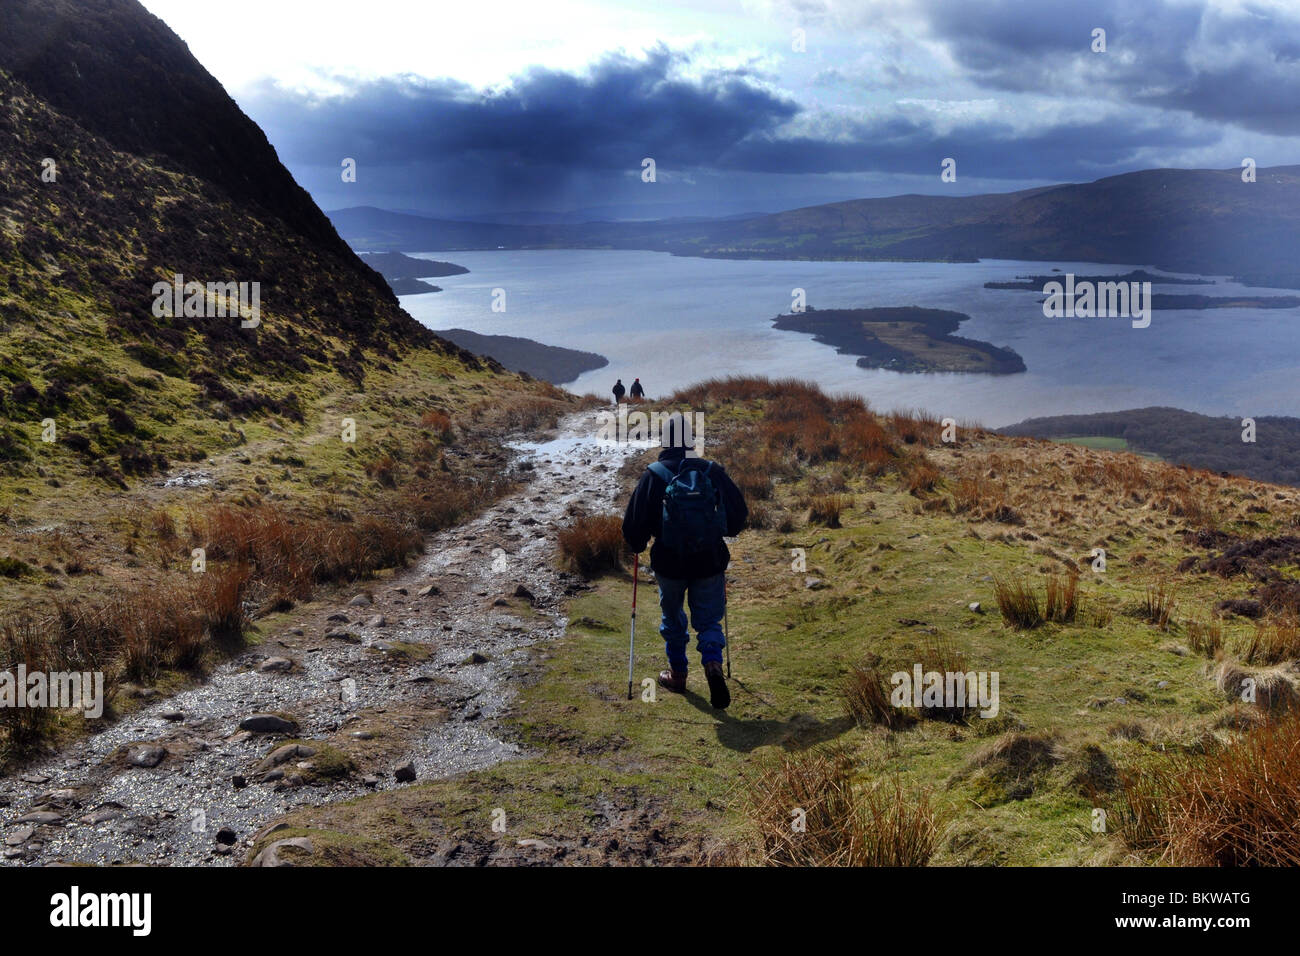 Active elderly people go hill walking in the Trossachs National Park, Scotland Stock Photo